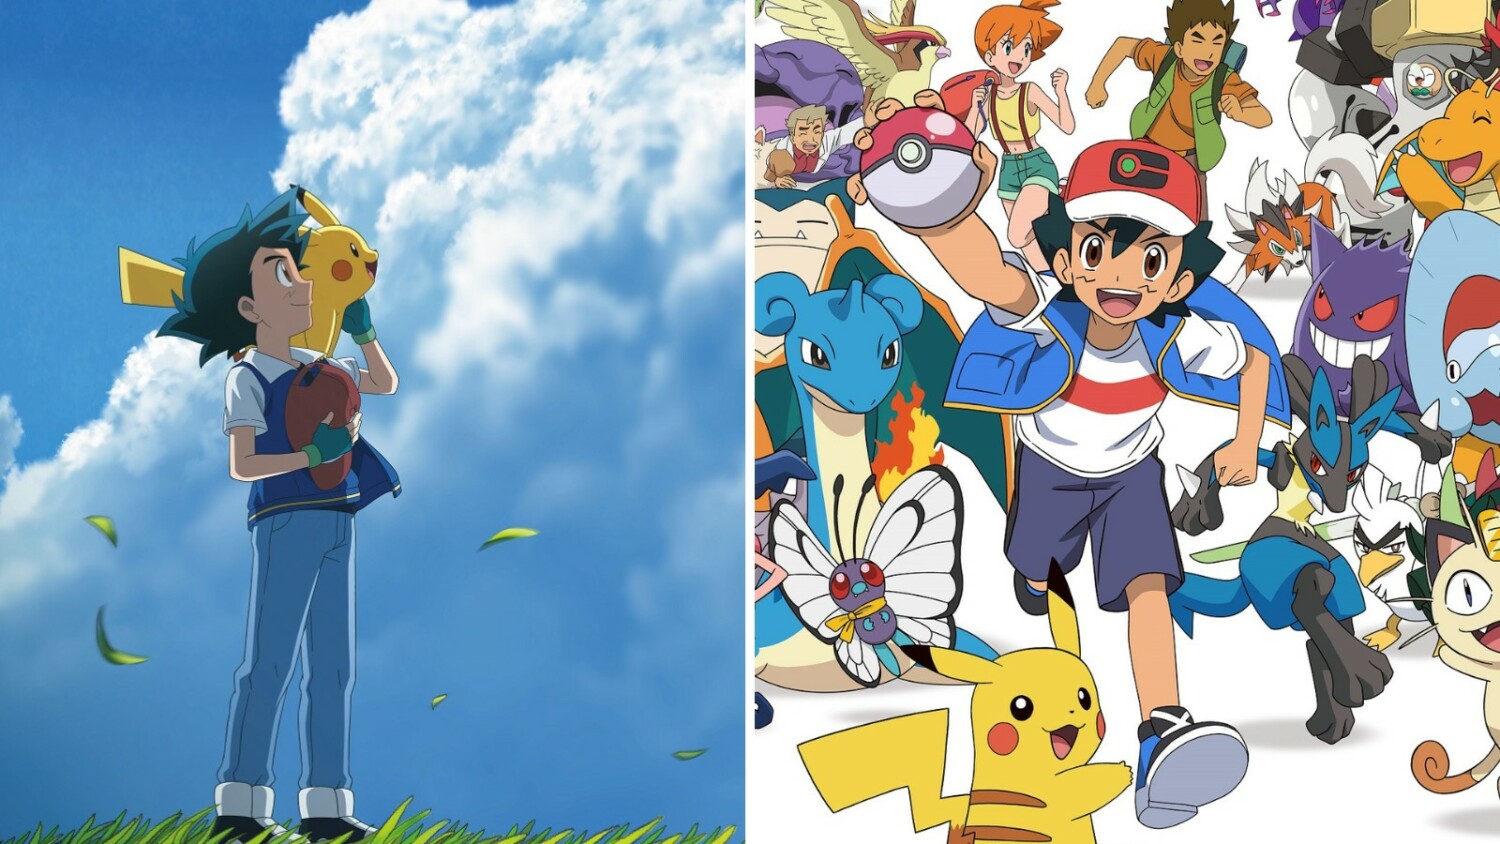 Ash Ketchum Becomes Pokemon Best Trainer in 'Ultimate Journeys'